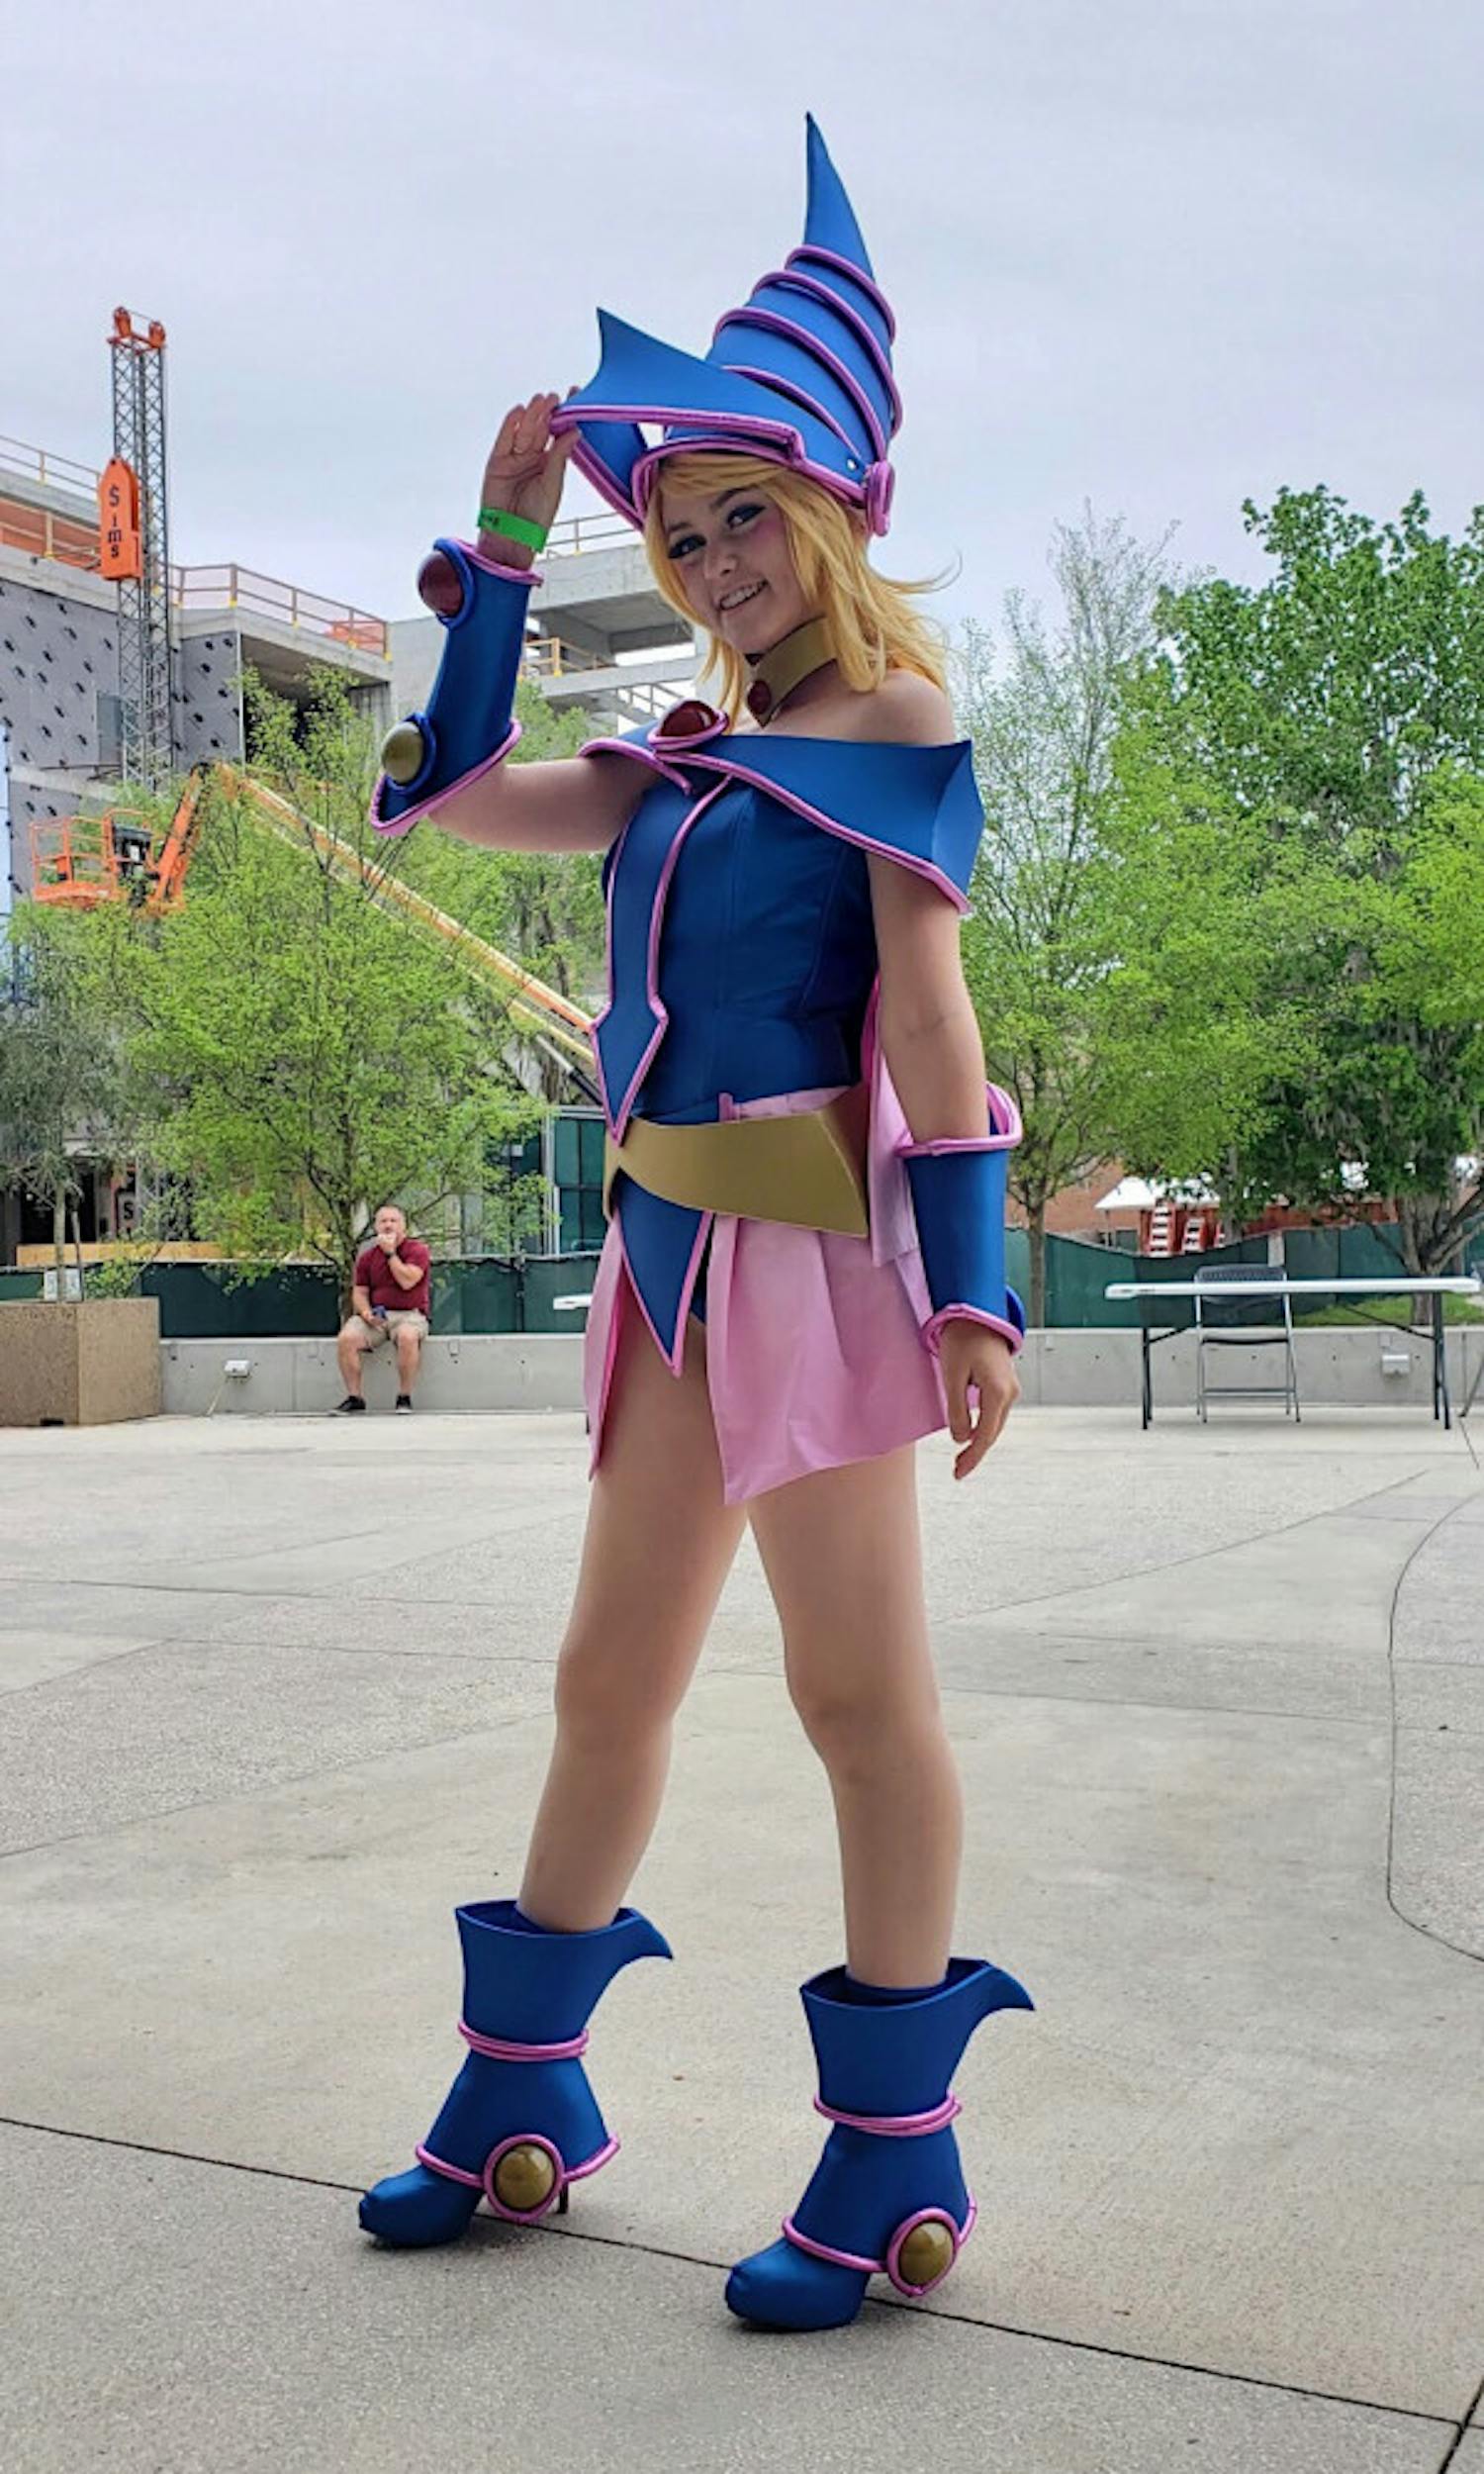 On Saturday and Sunday, the Reitz Union was filled with more than 3,700 guests from across Florida for SwampCon — an annual event where people come together to interact with those who share the love for video games, anime, sci-fi and comics. Some guests even cosplayed as their favorite pop culture characters.
So, here were the best cosplays of SwampCon 2019.
 